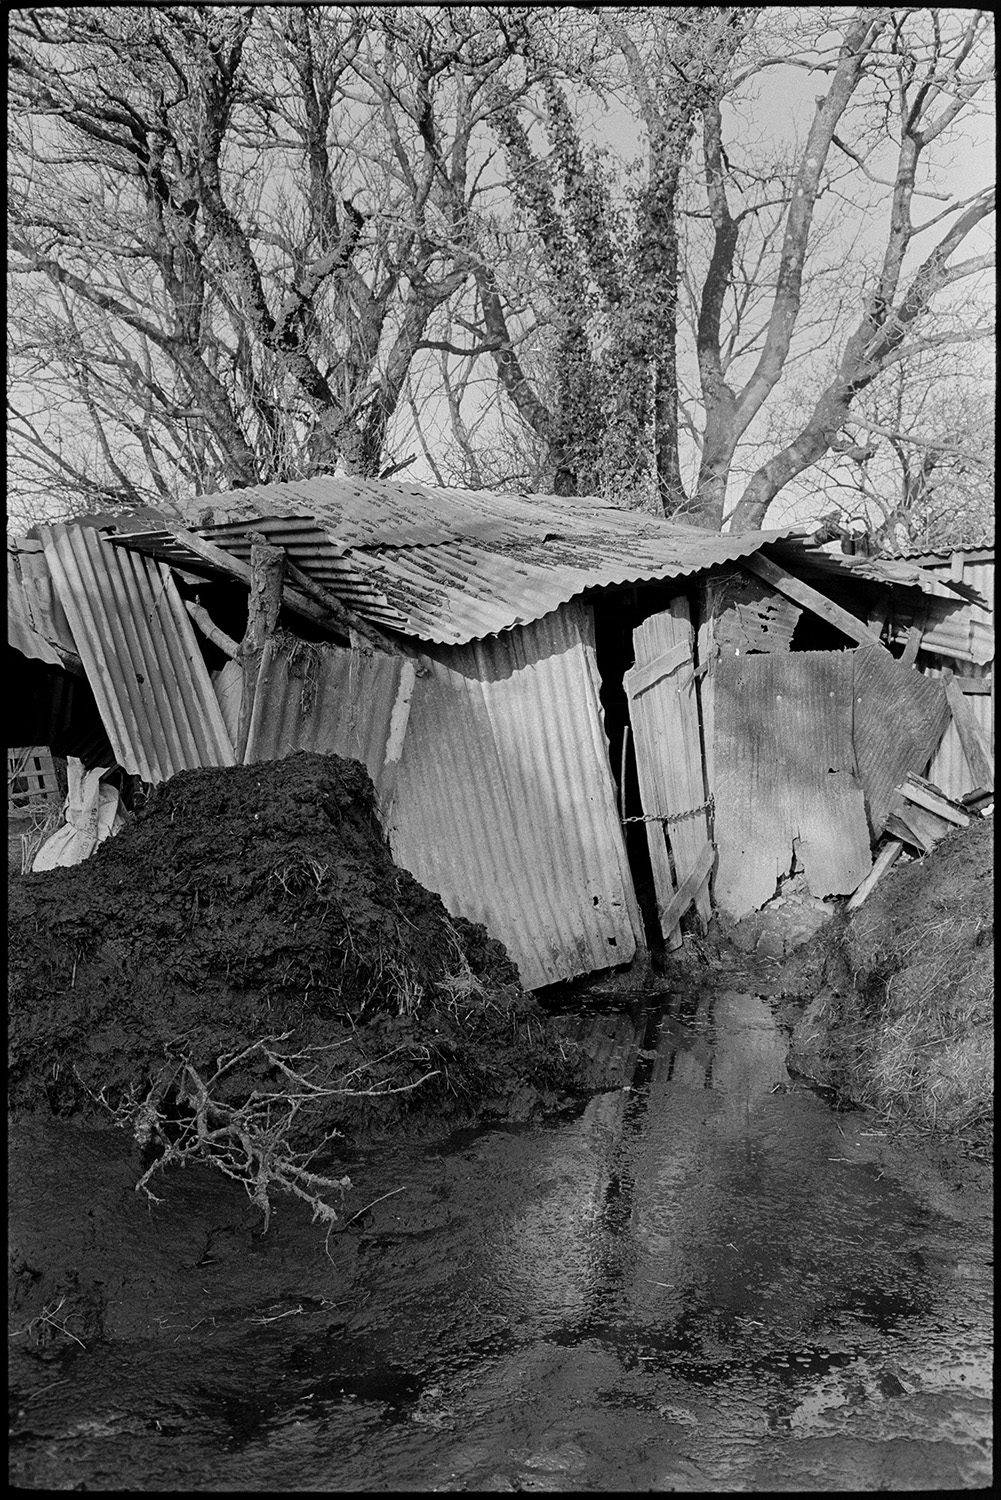 Muddy farmyard with tractor and link box, cow and collapsing old barns, tights on washing line.
[A collapsing corrugated iron barn at Cuppers Piece, Beaford. A pile of manure is next to the barn and trees are visible in the background.]